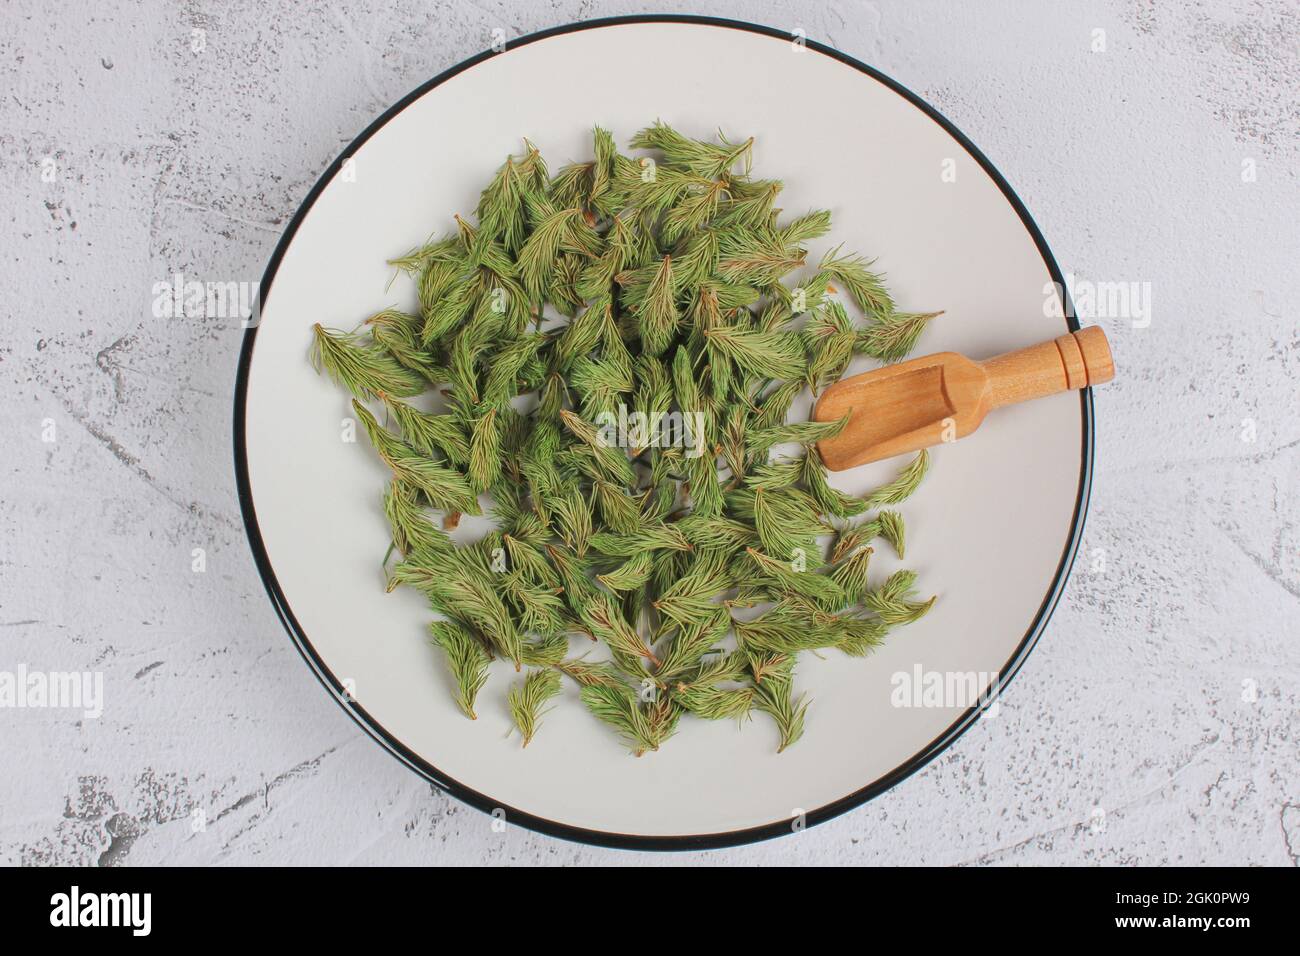 Dried young shoots of spruce prepare for tea. Remedy for cough and asthma. Homeopathy and natural folk medicine. Flat lay. Stock Photo